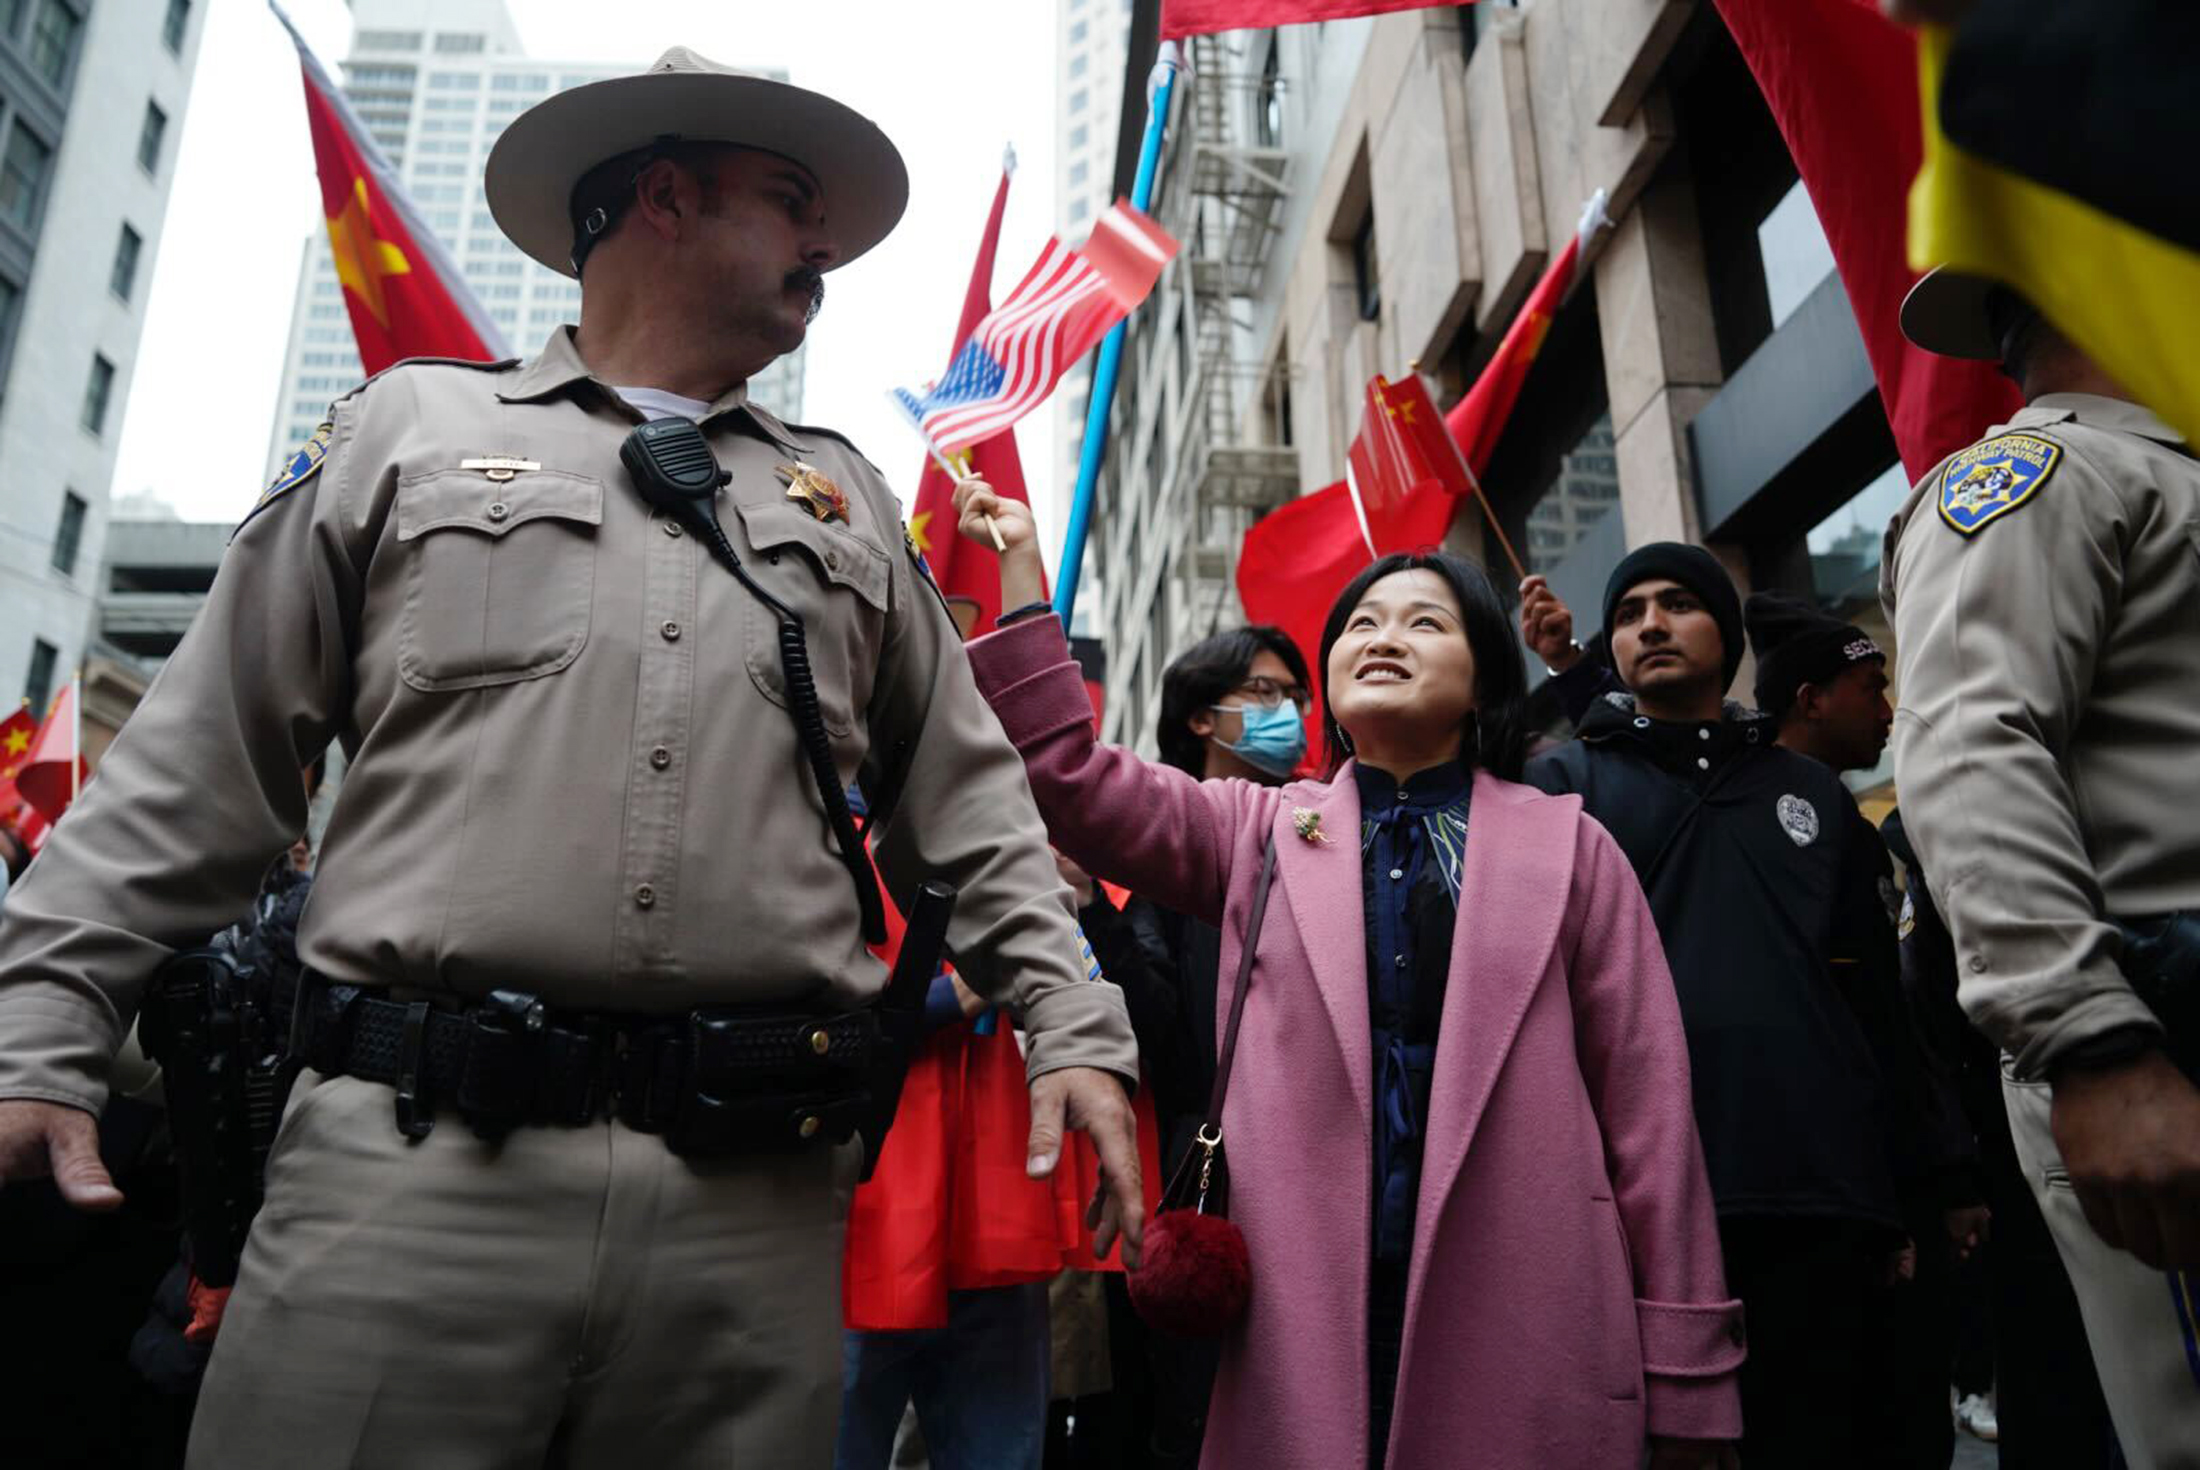 A pro-China protester holds a Chinese flag as California Highway Patrol stands close during a demonstration.